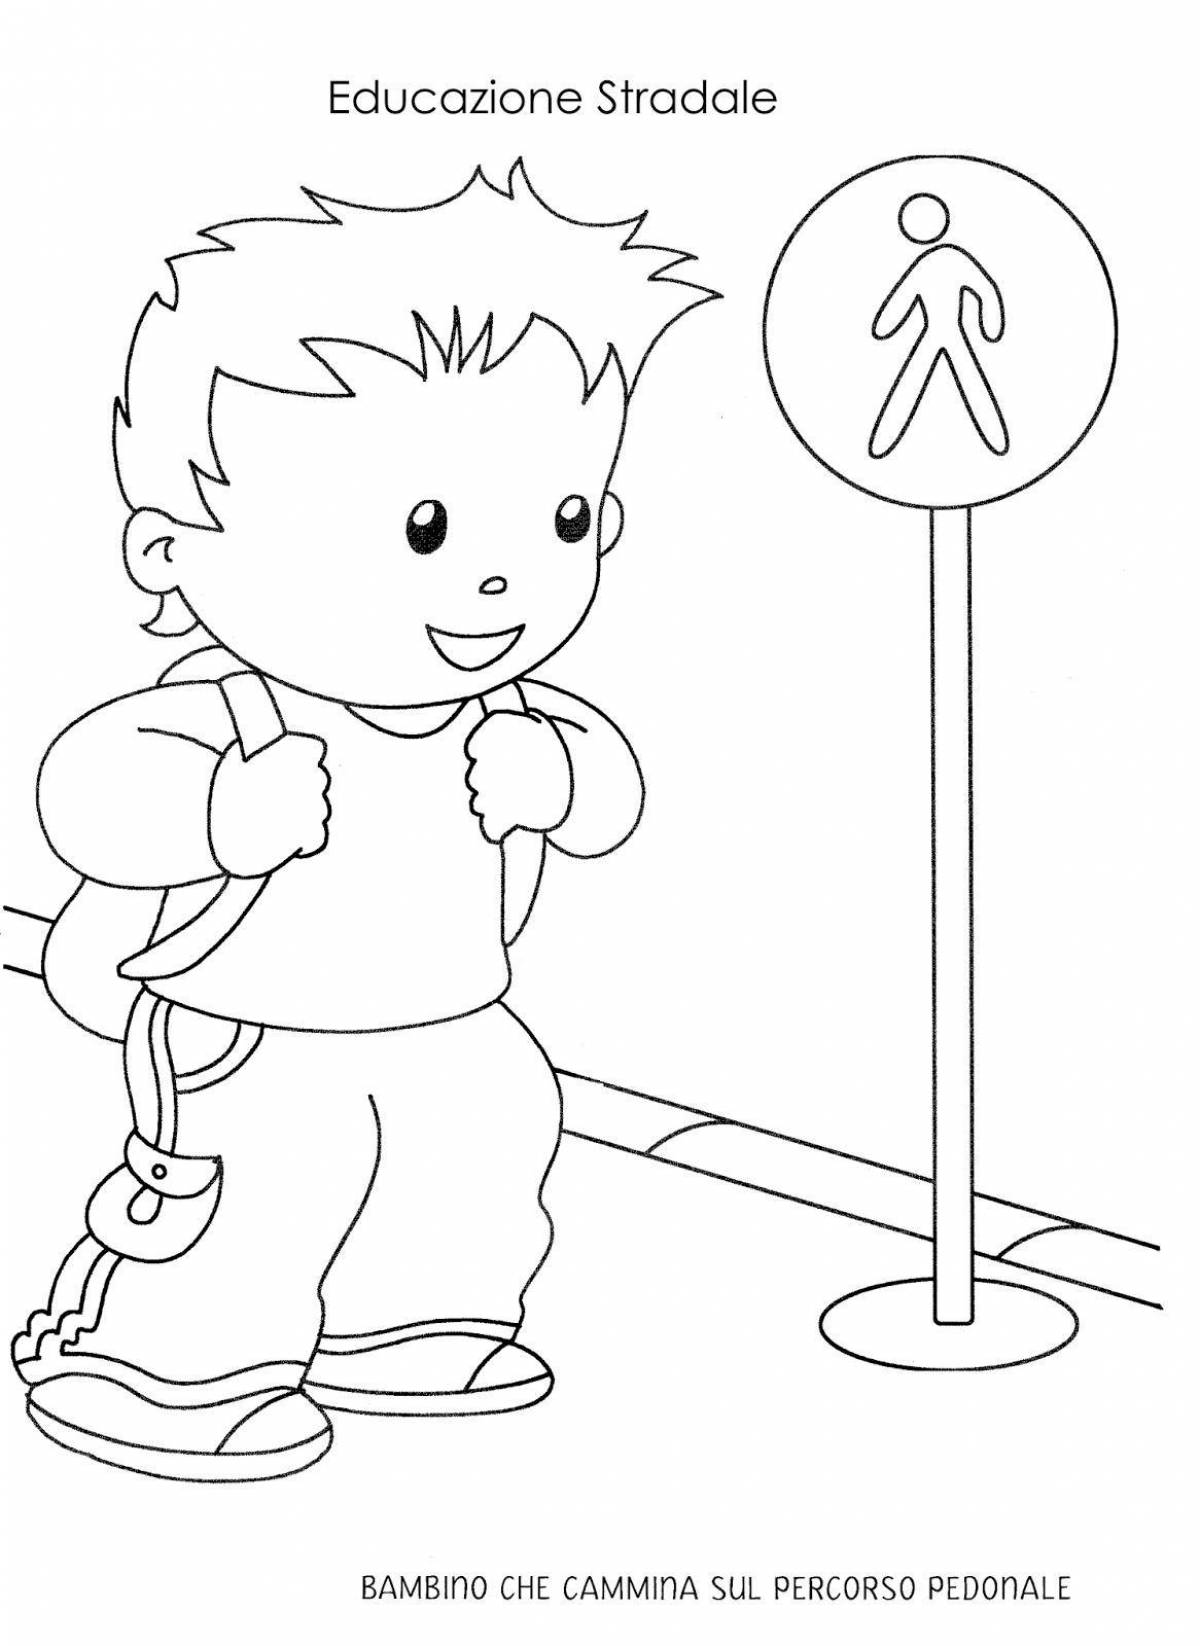 Pedestrian bright coloring page